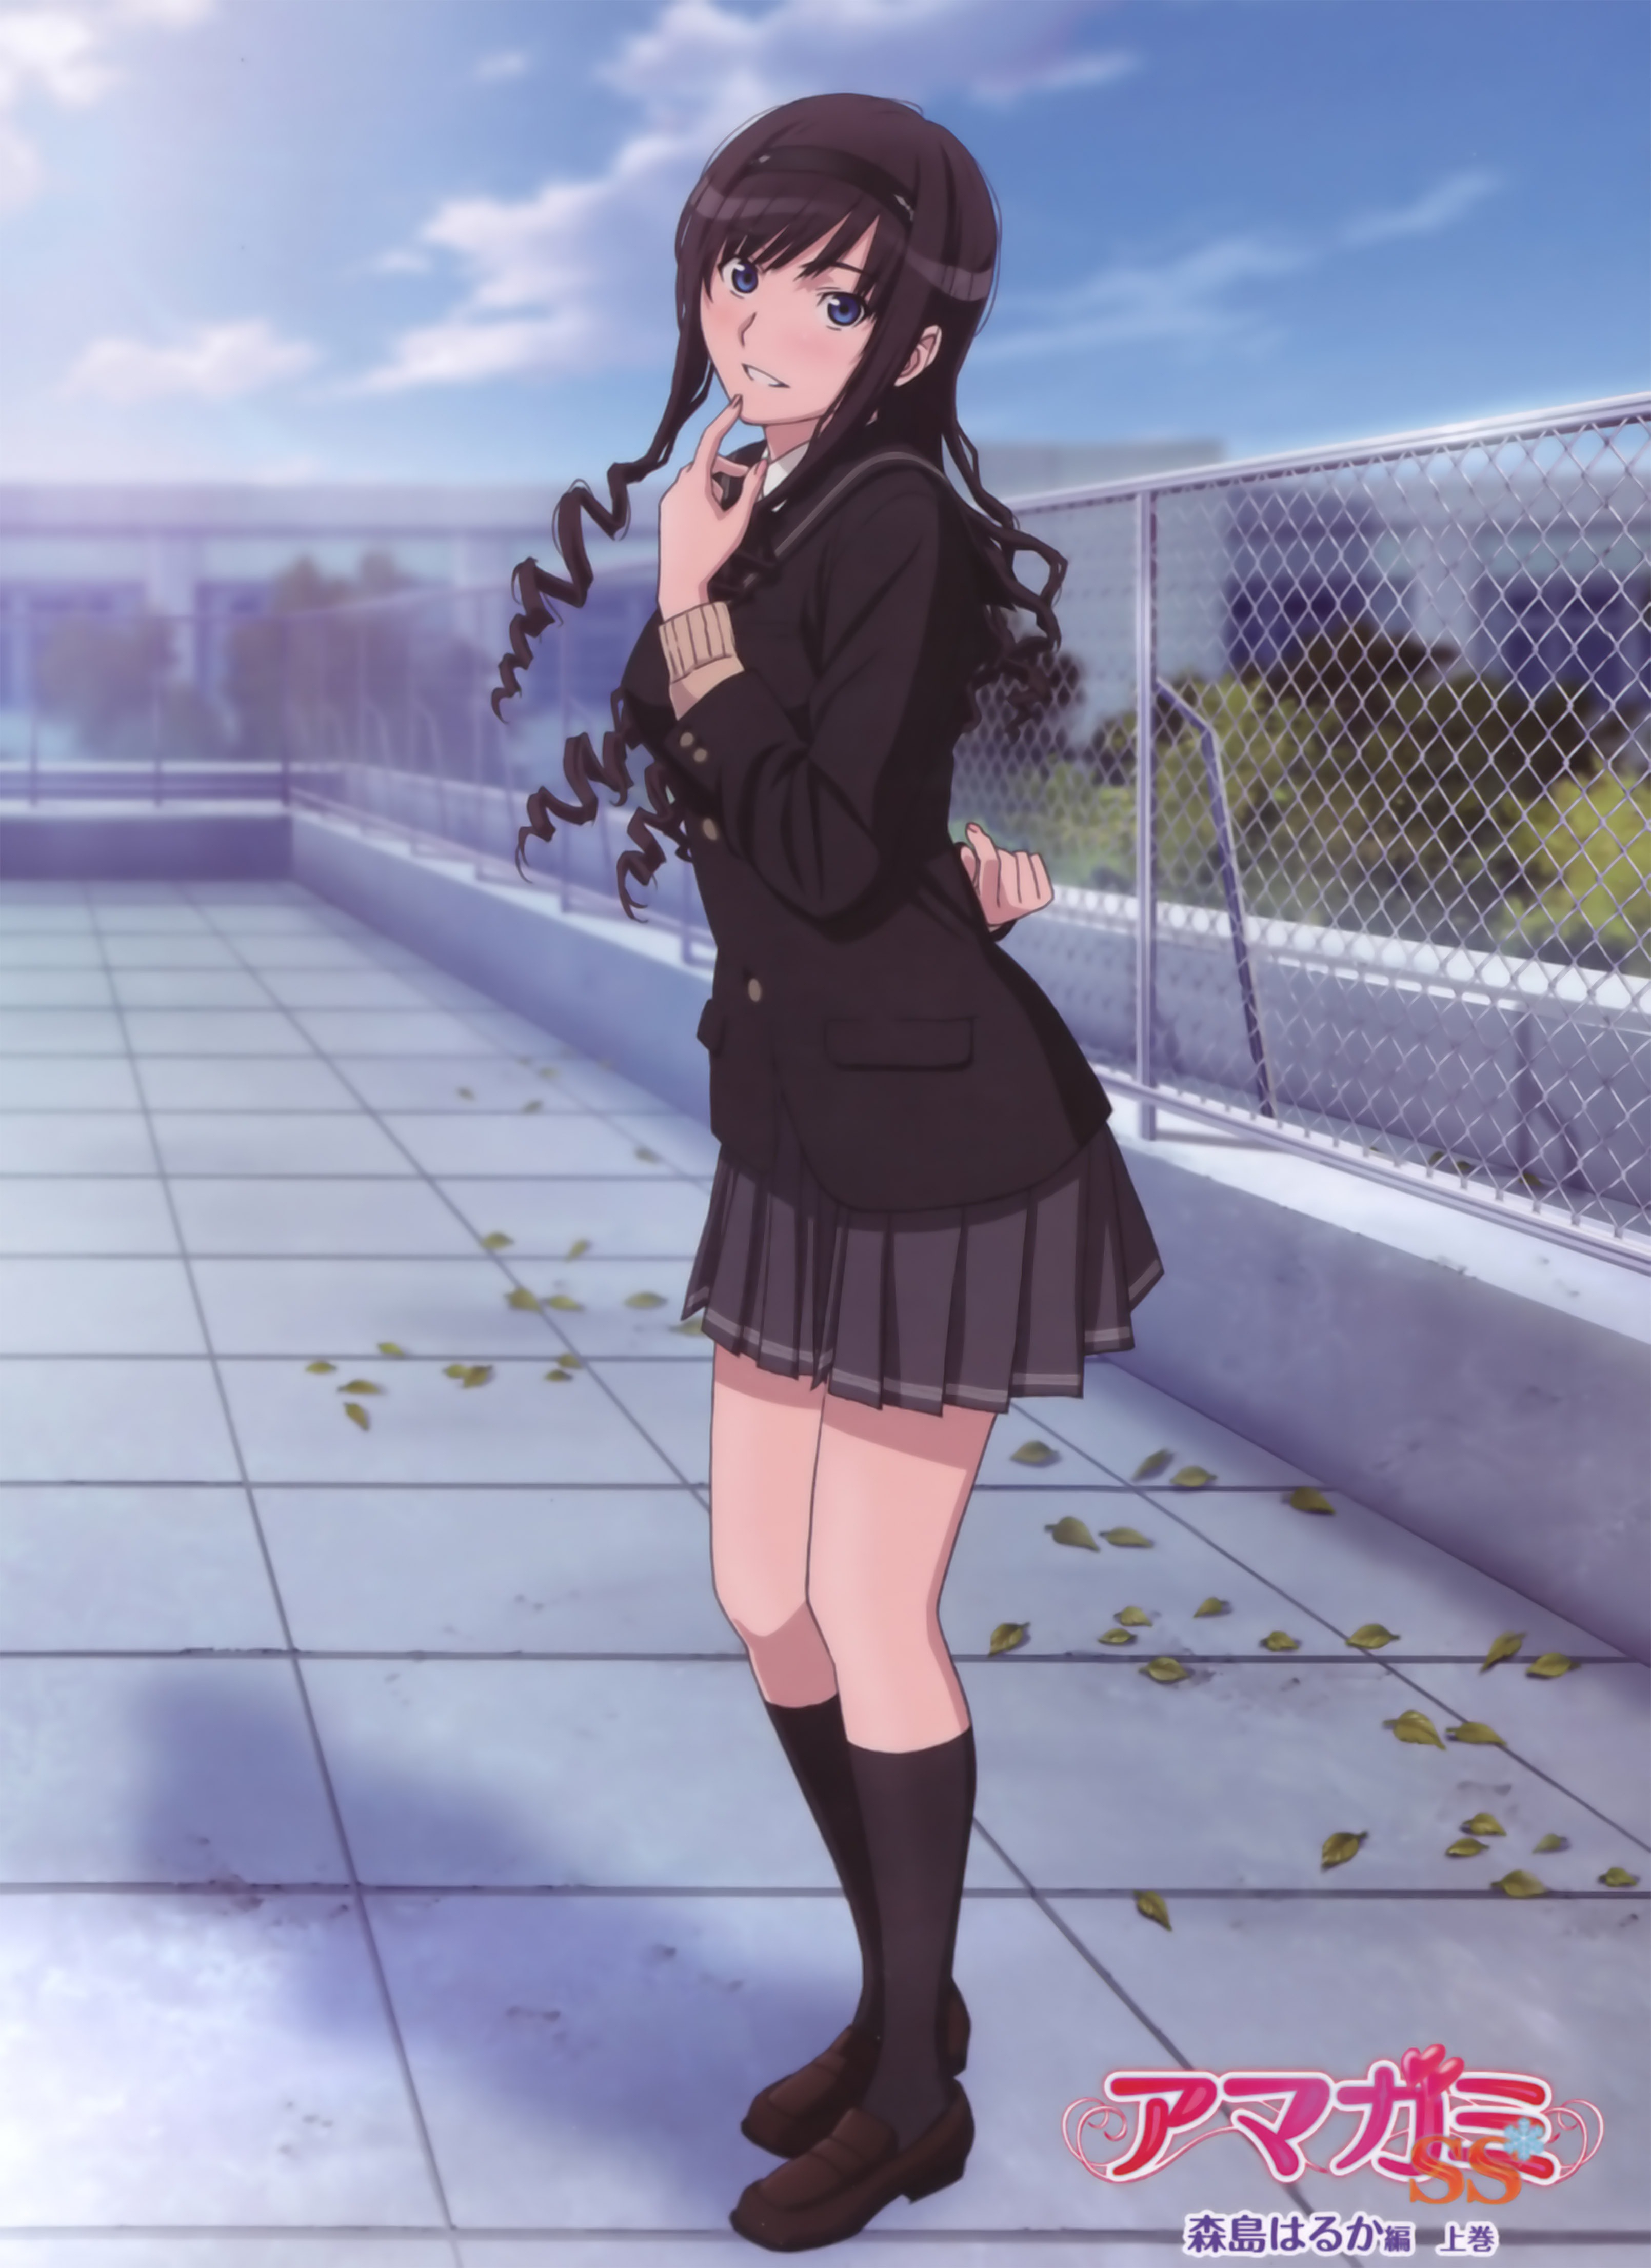 Amagami Wallpapers